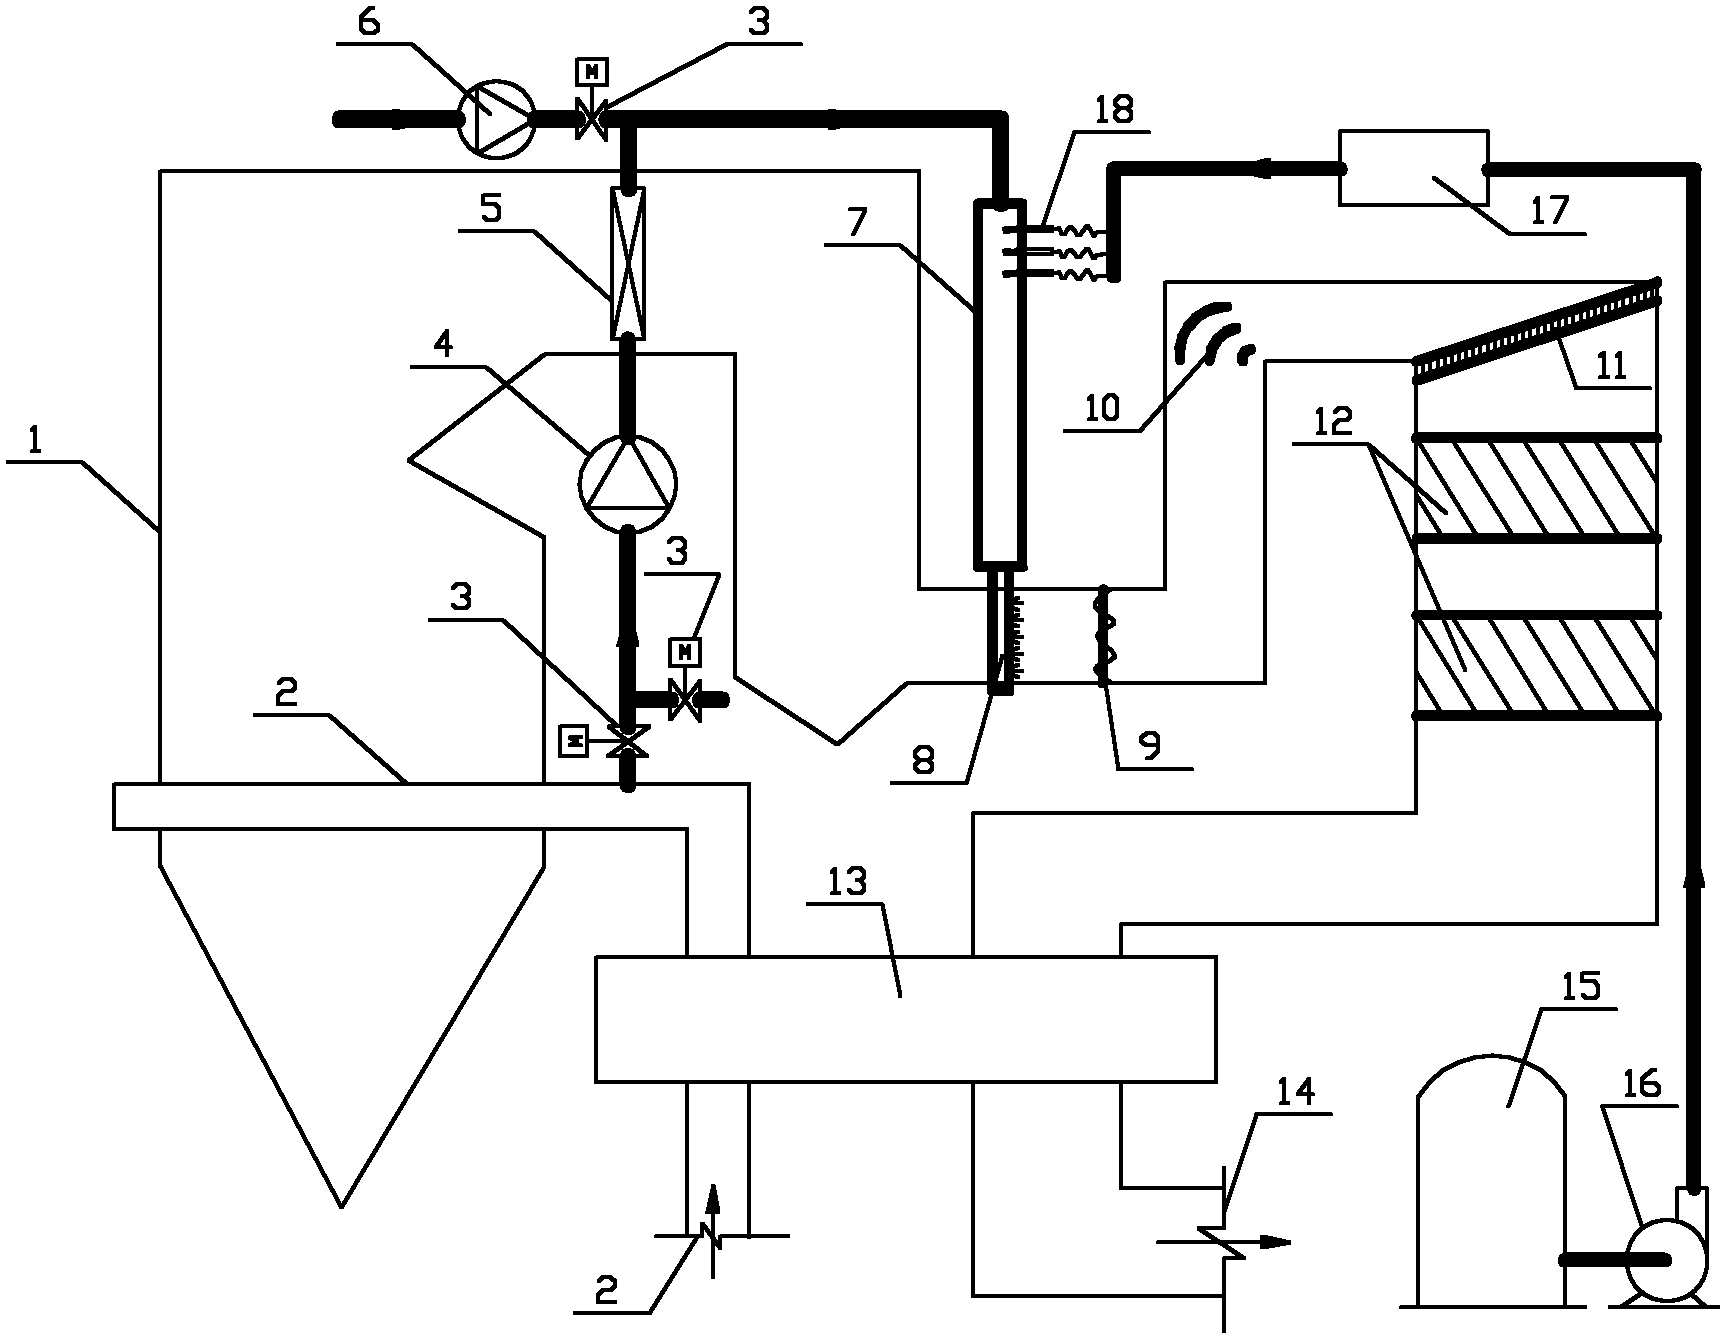 Urea-solution-based SCR (selective catalytic reduction) flue gas denitration process and device